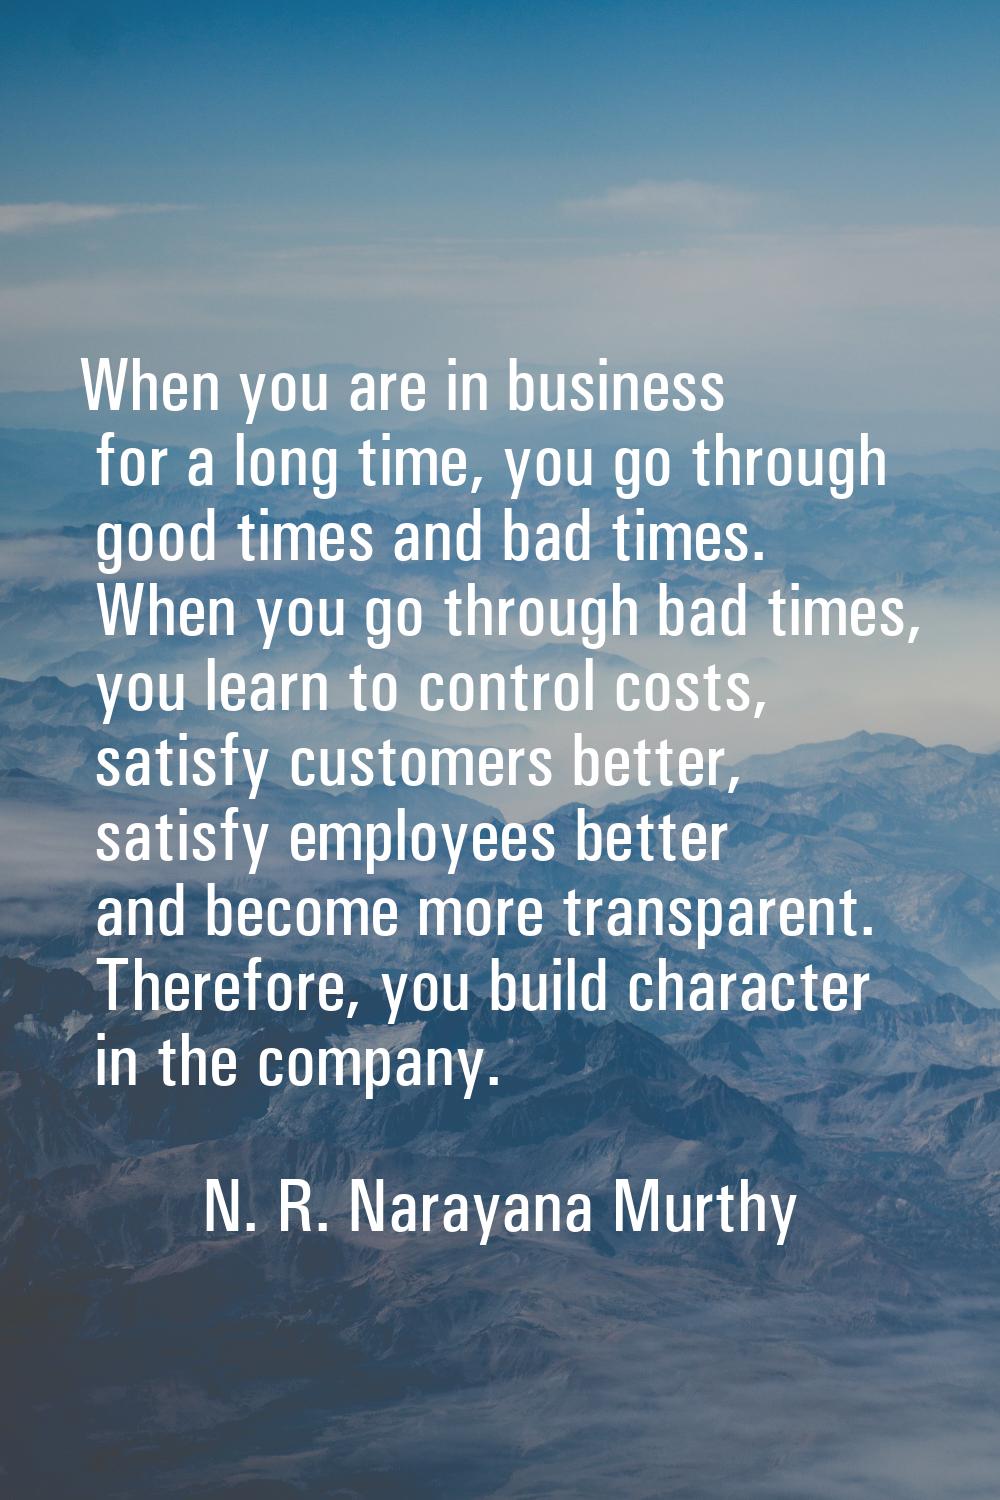 When you are in business for a long time, you go through good times and bad times. When you go thro